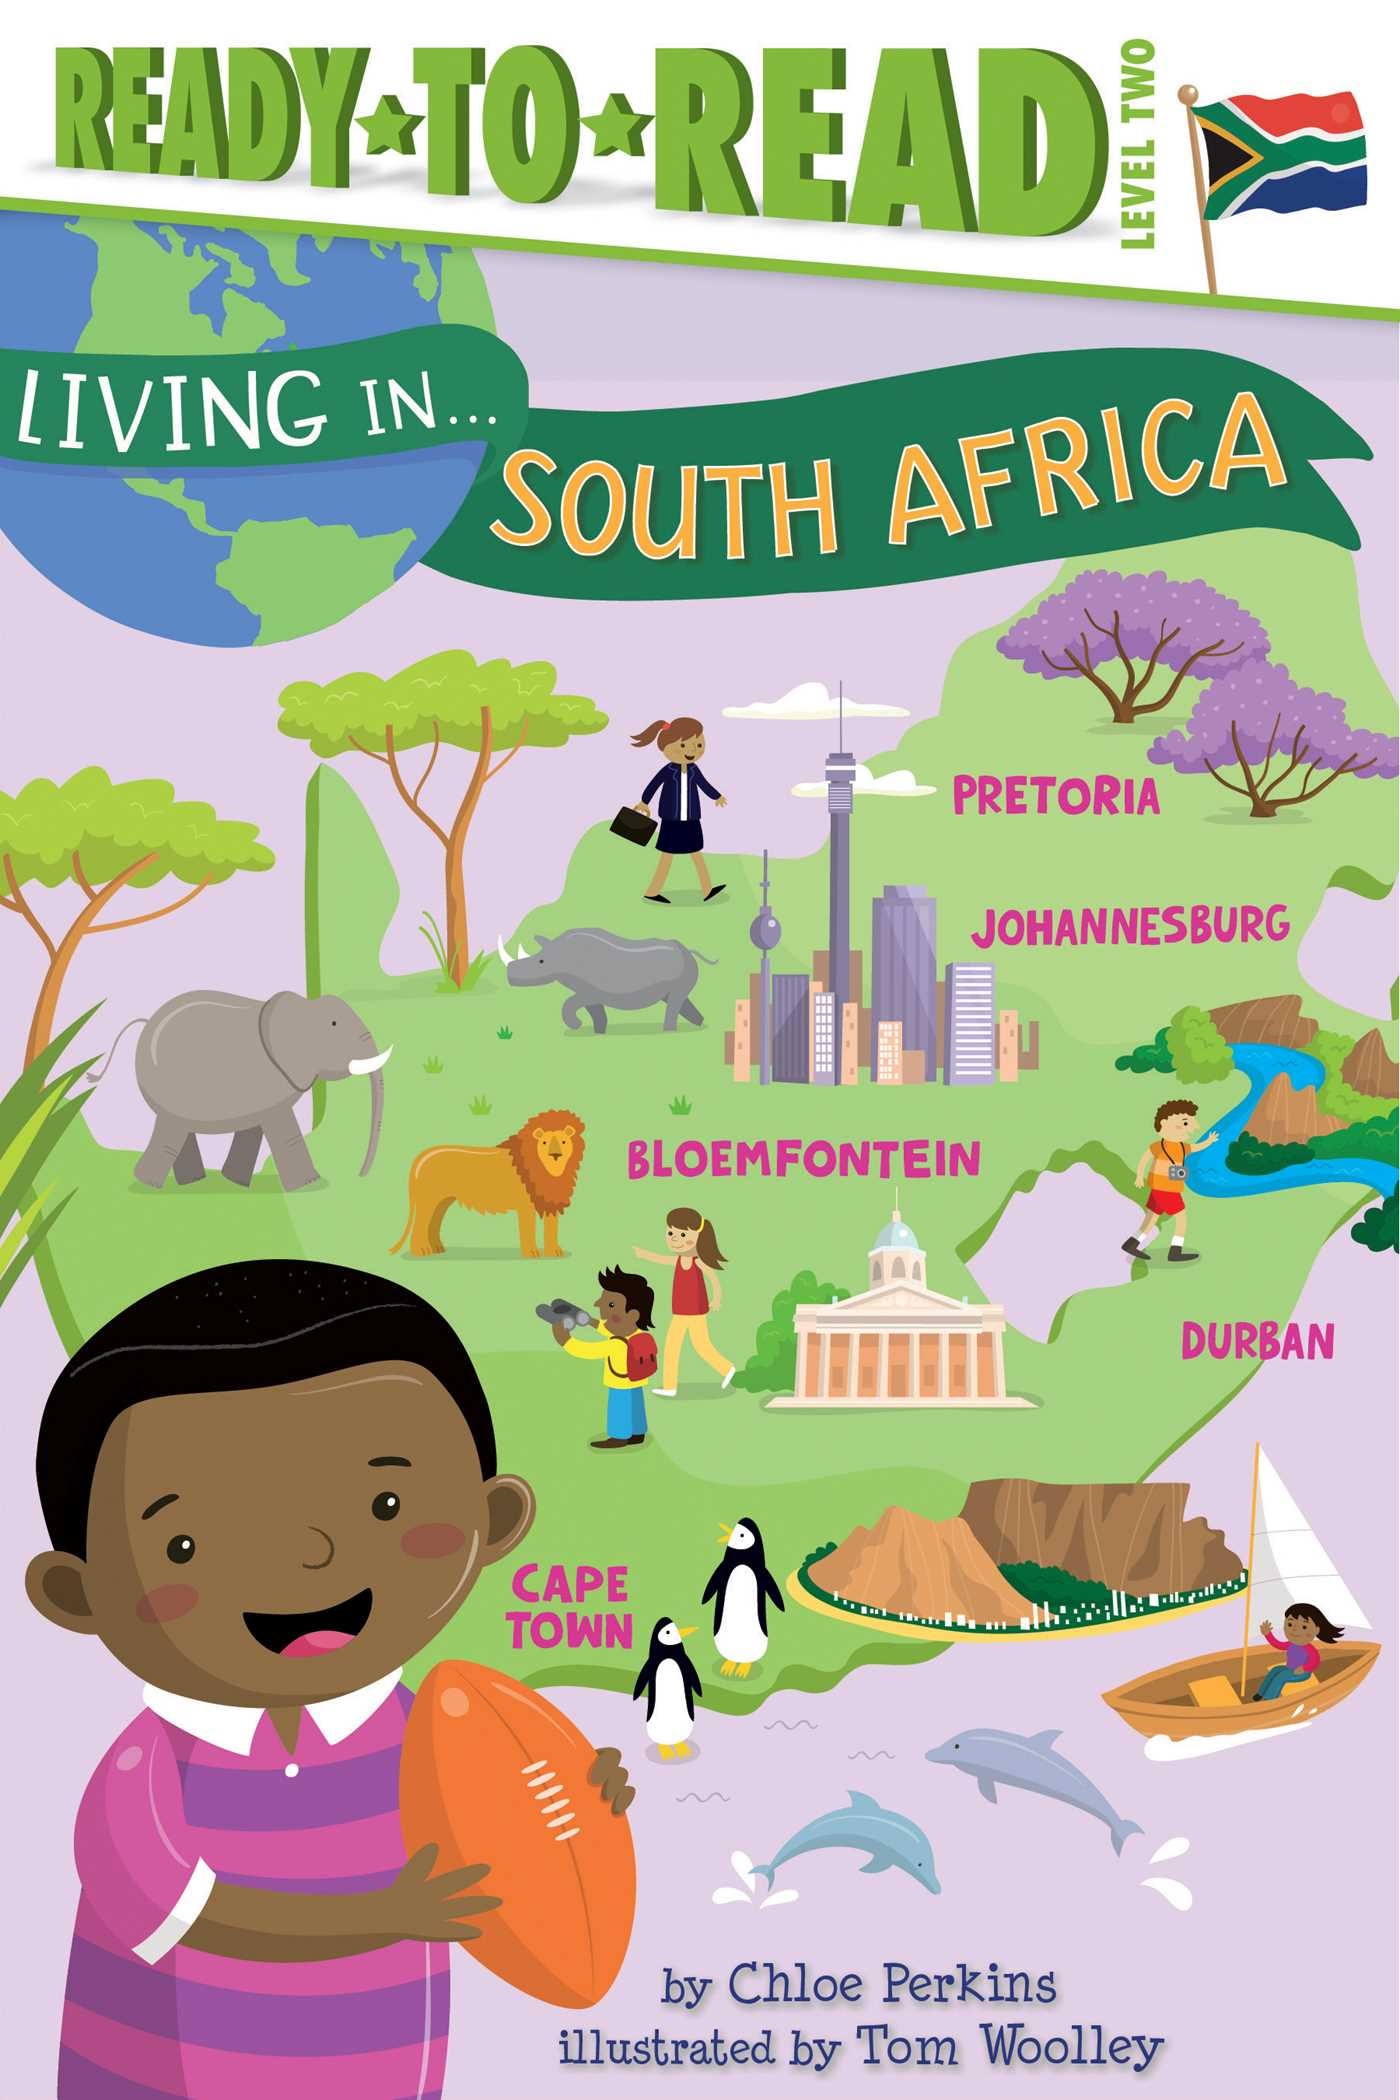 Living in South Africa by Chloe Perkins